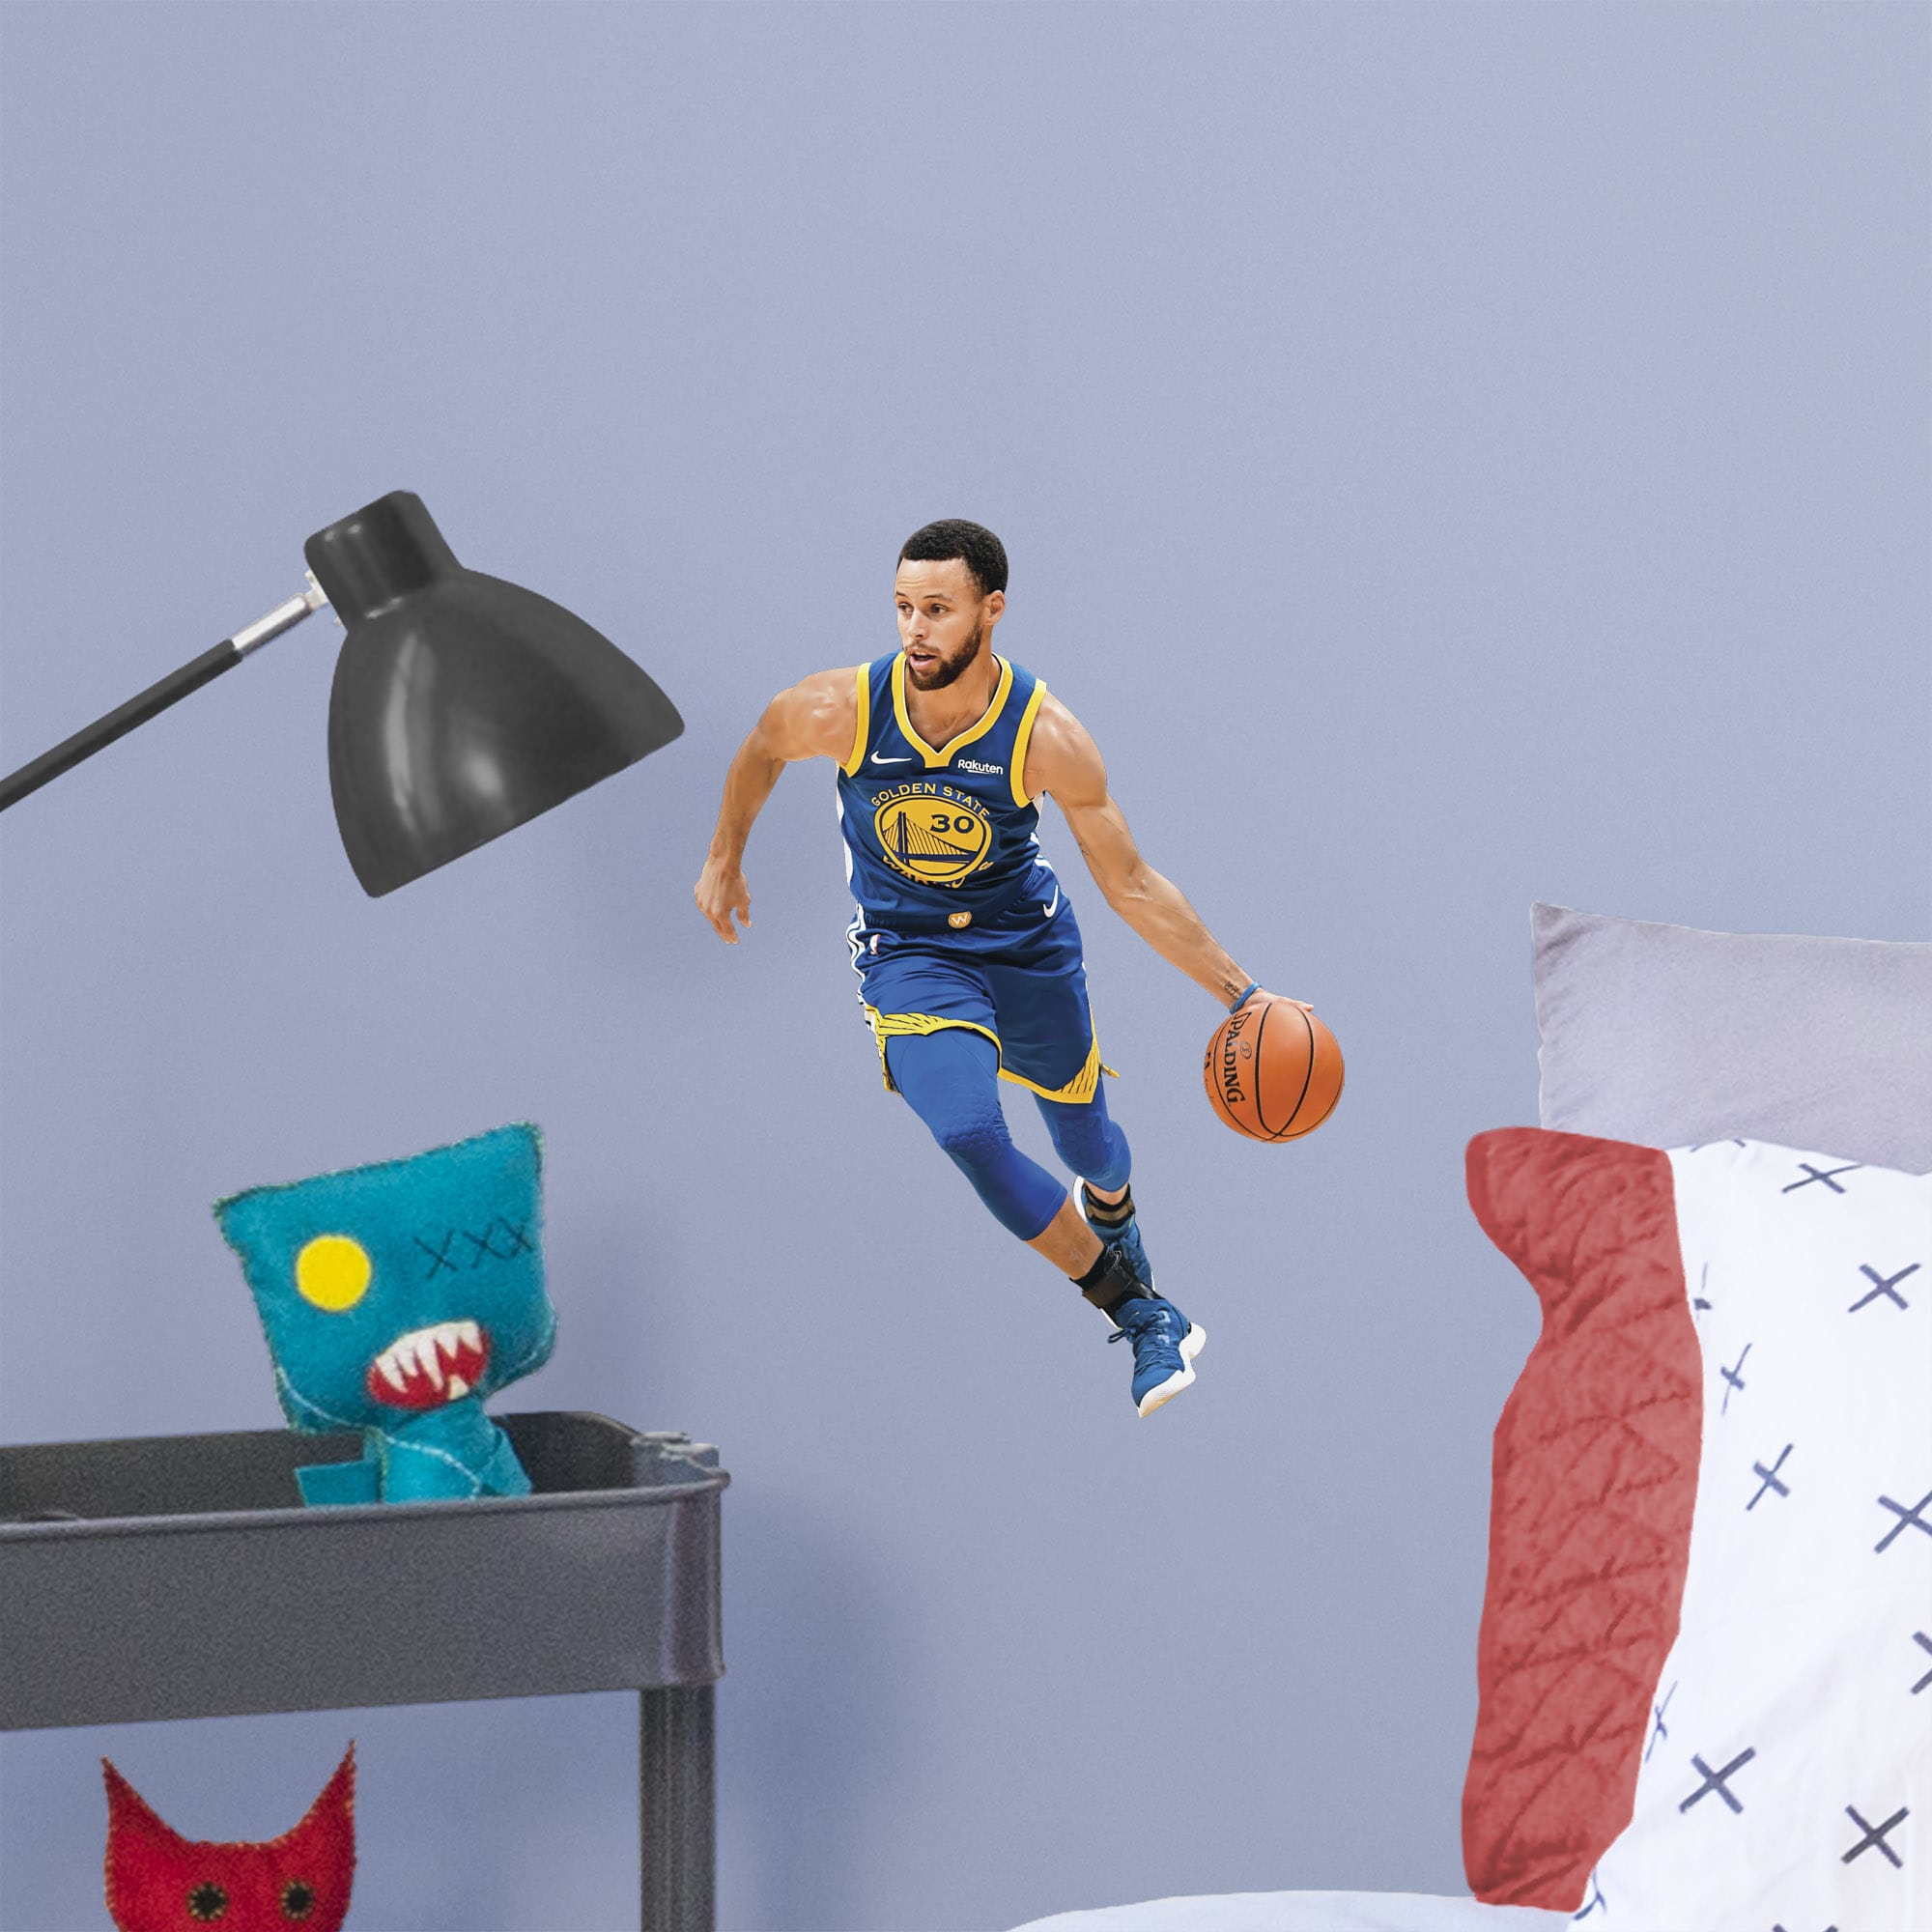 Stephen Curry for Golden State Warriors - Officially Licensed NBA Removable Wall Decal by Fathead | Vinyl